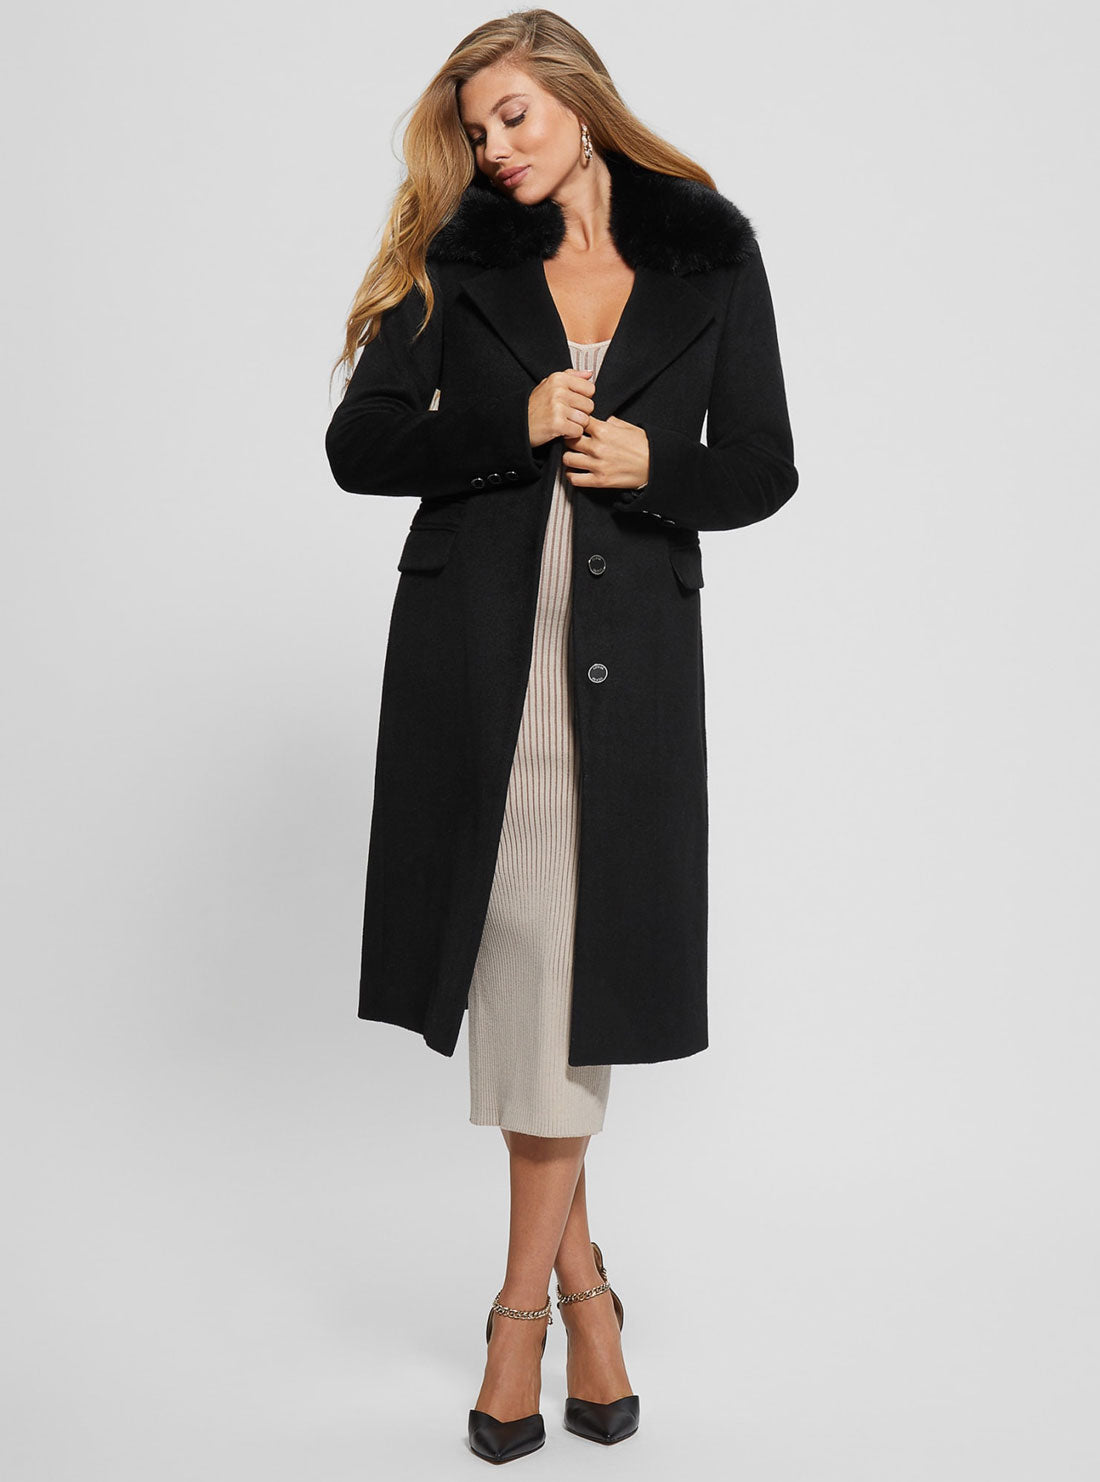 GUESS Eco Black New Laurence Coat full view